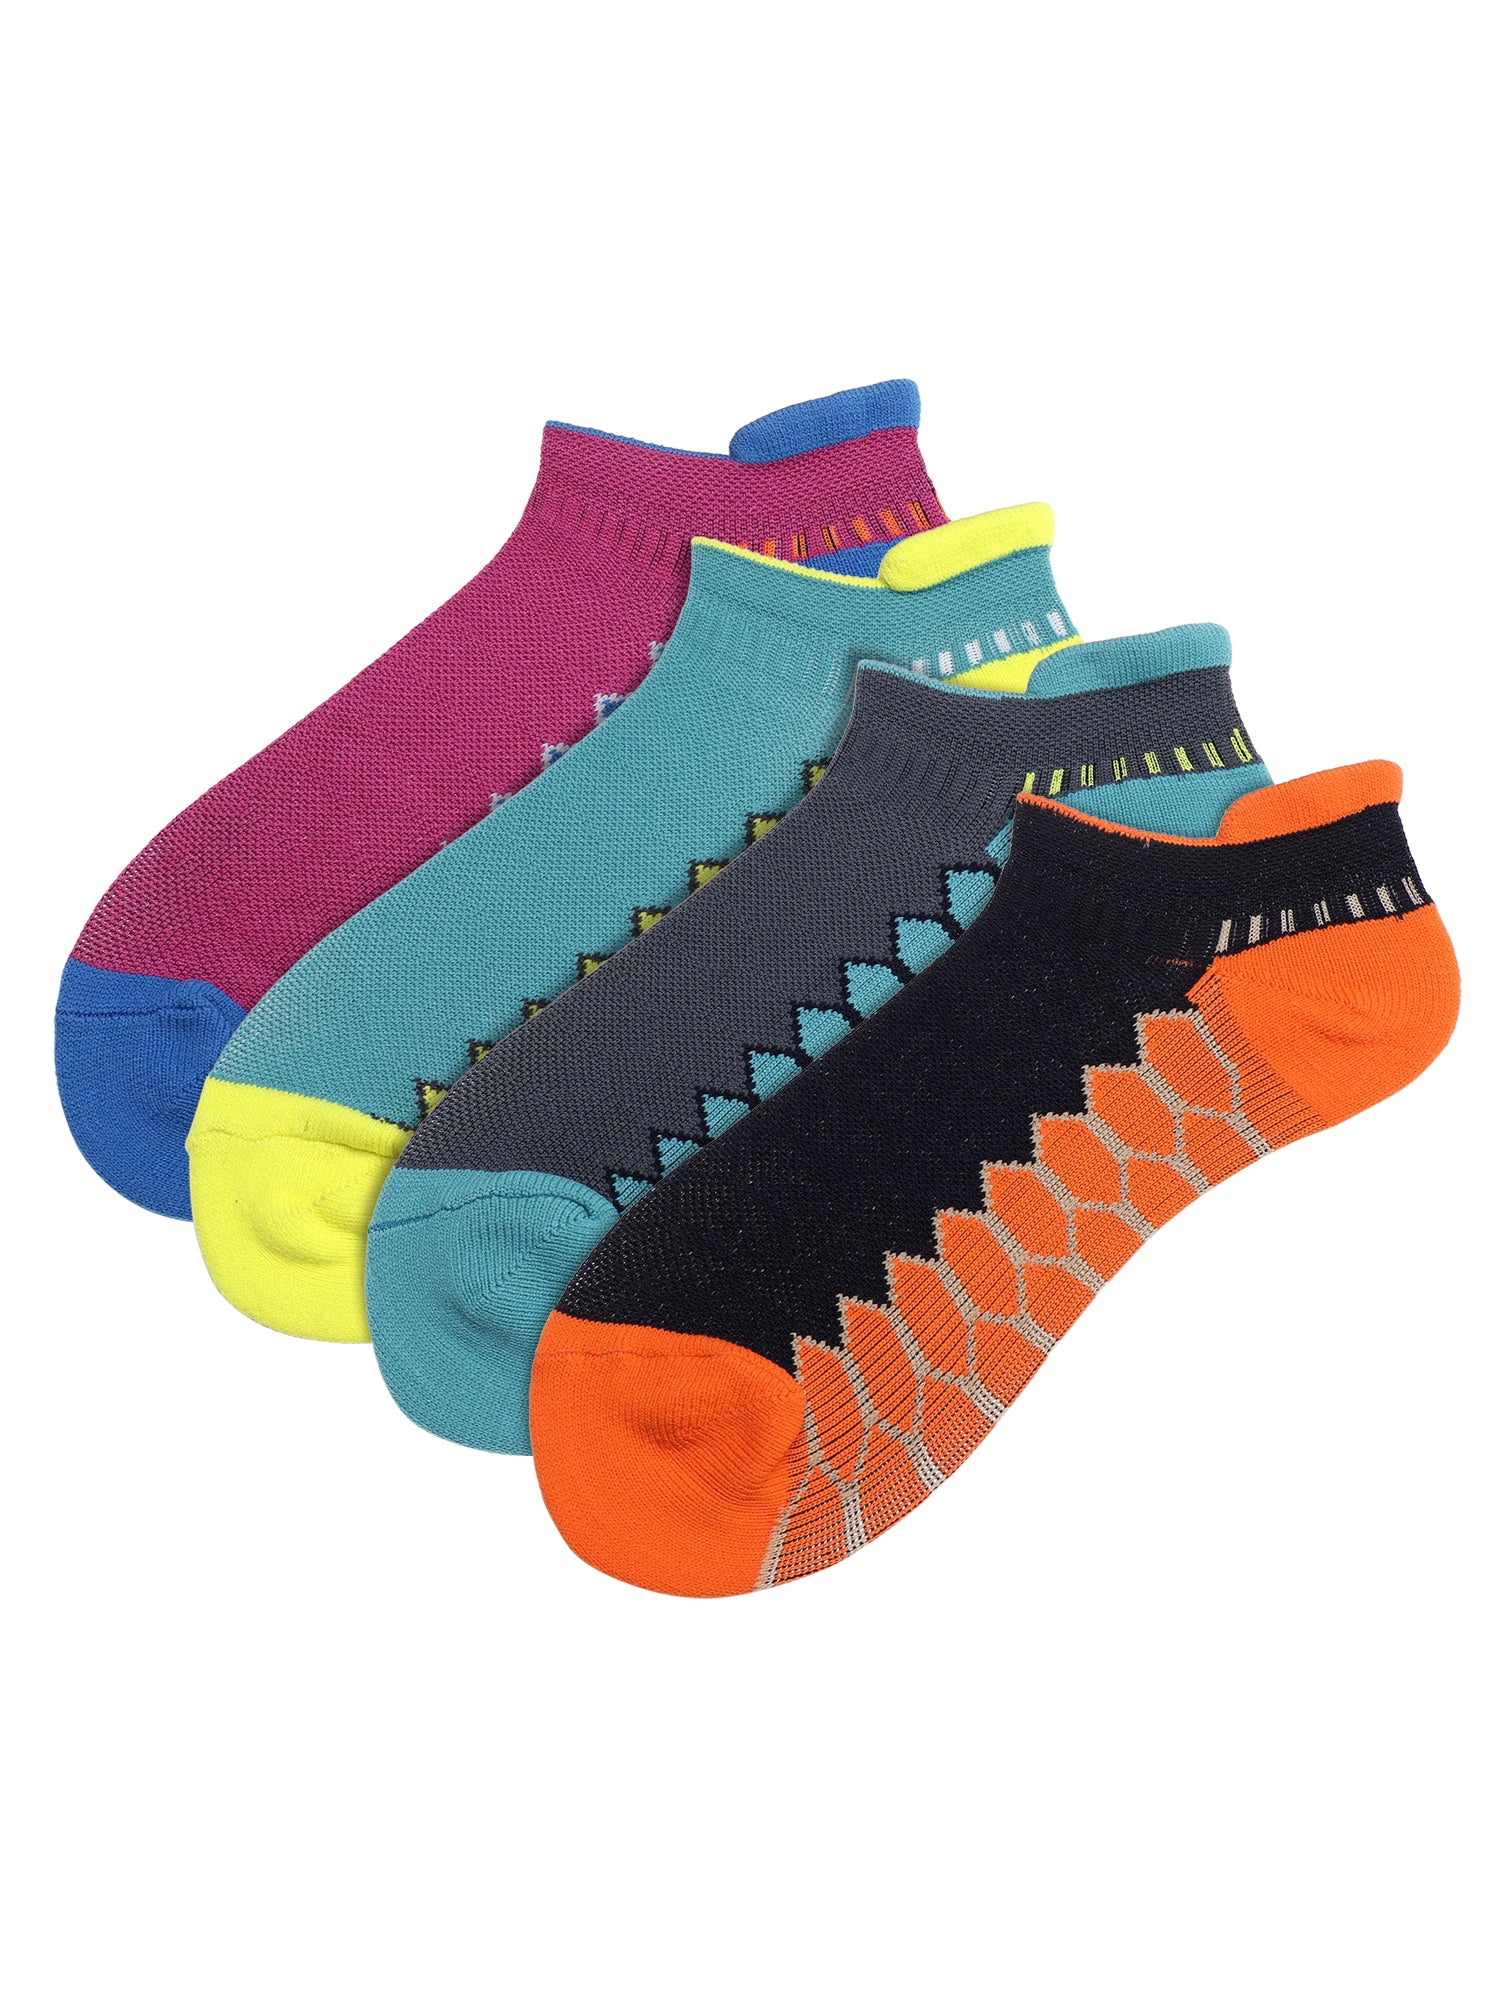 Performax | The Jock Sock | Stand Out Box Of 4 Pairs | Low Cut Sports Socks